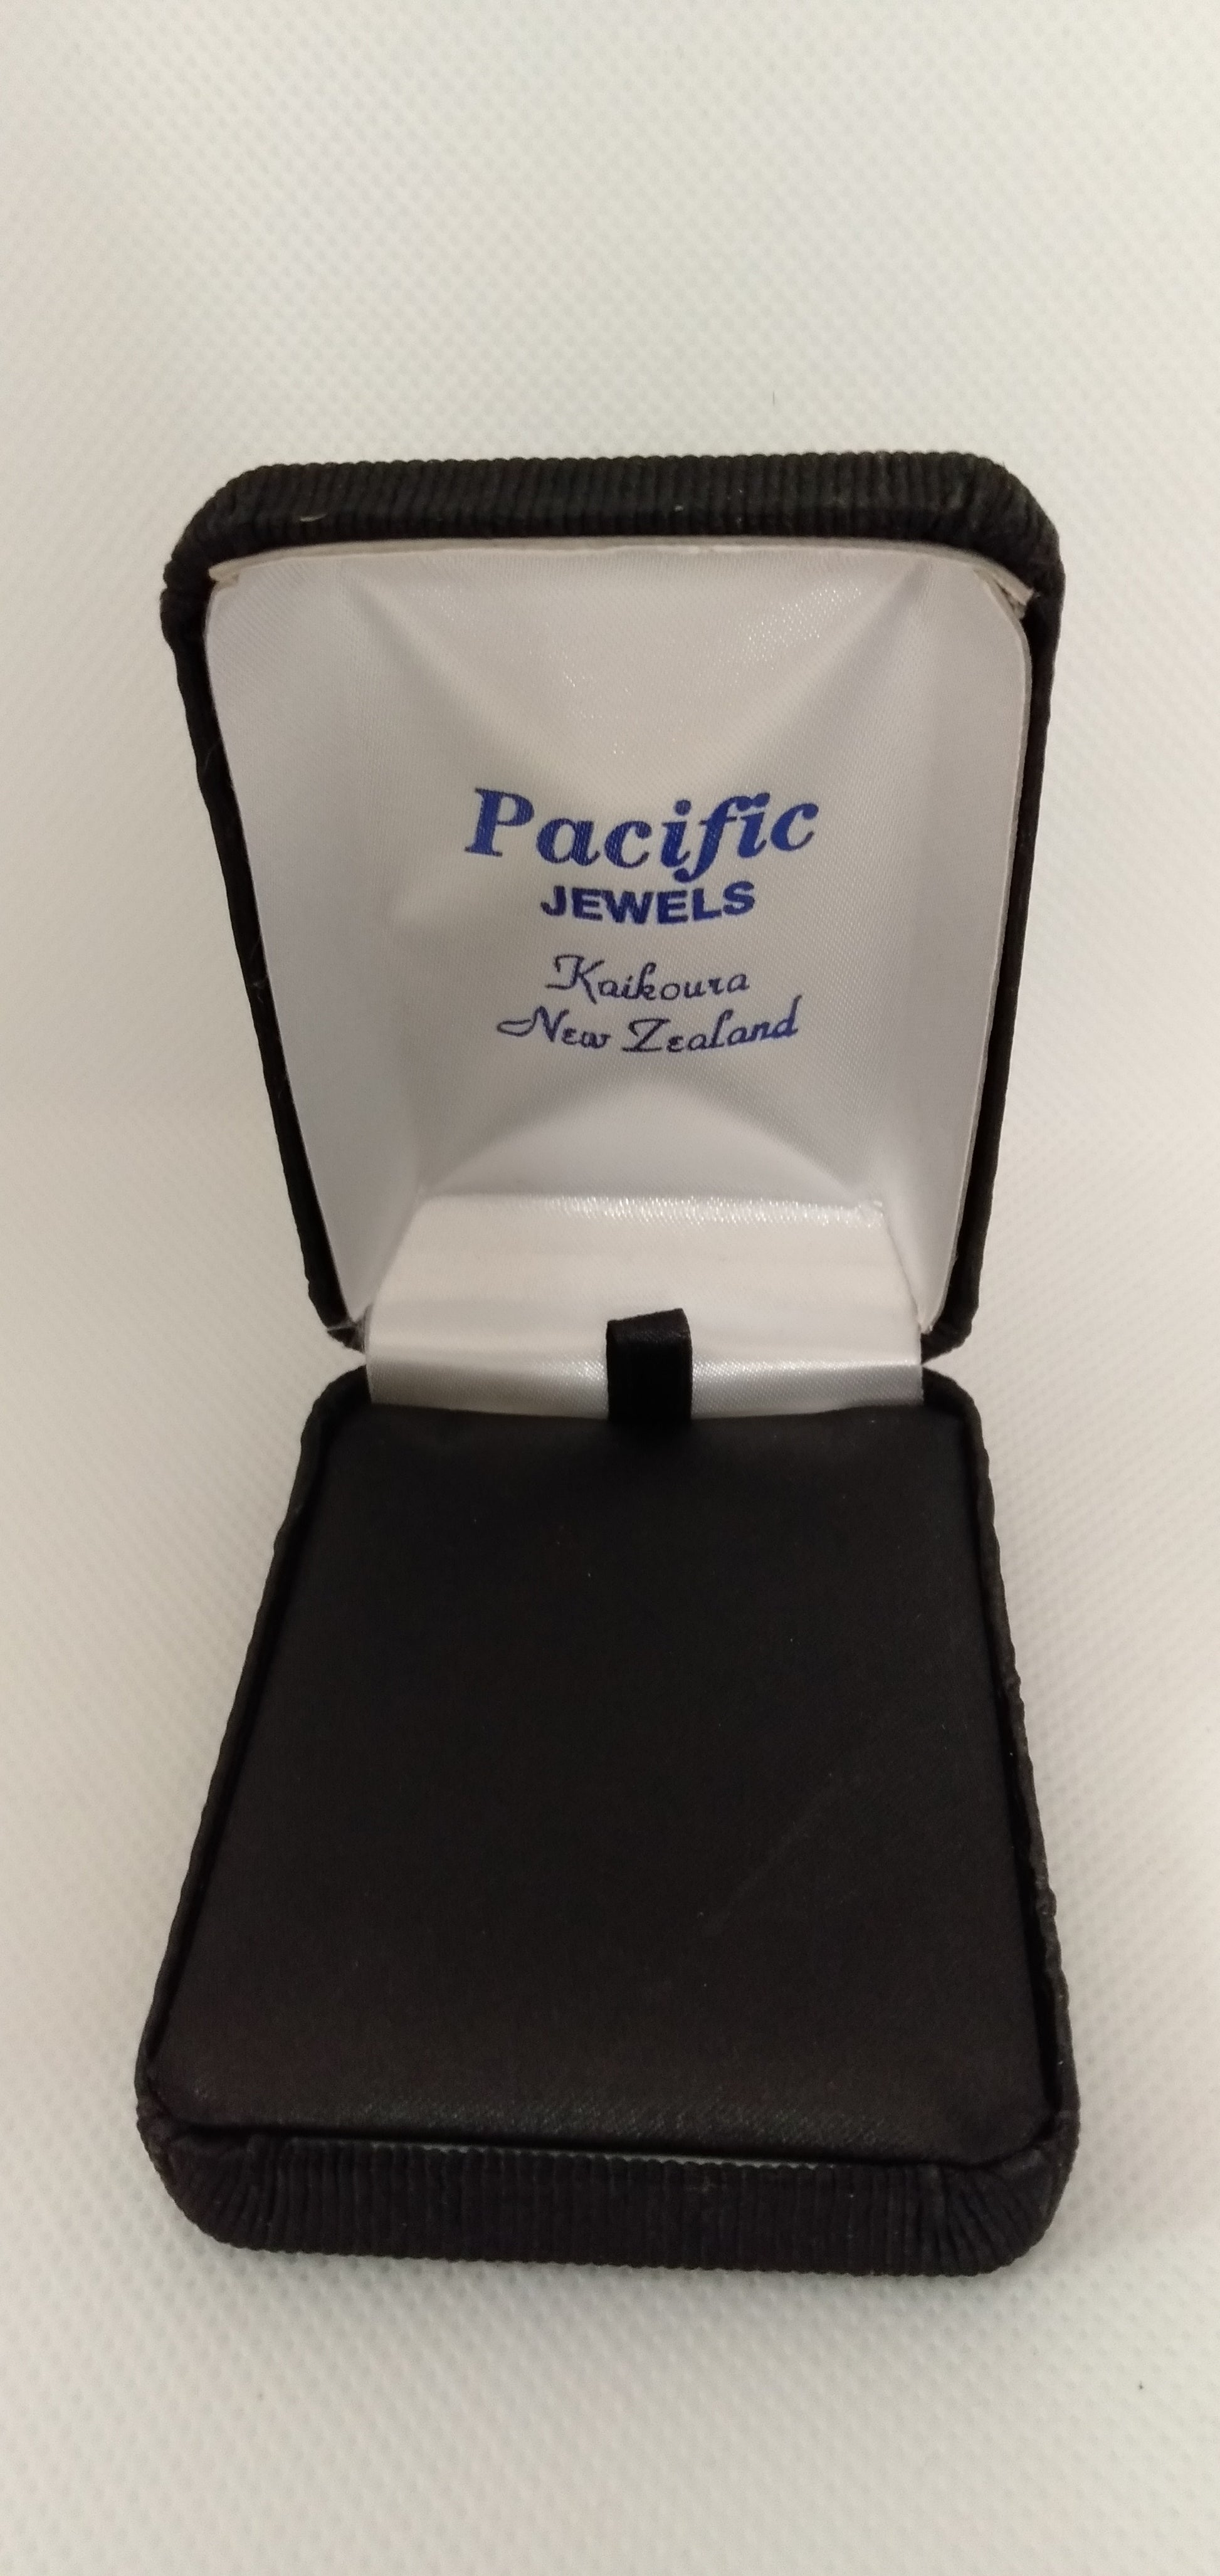 Necklace Display Box from Pacific Jewel - Southern Paua New Zealand